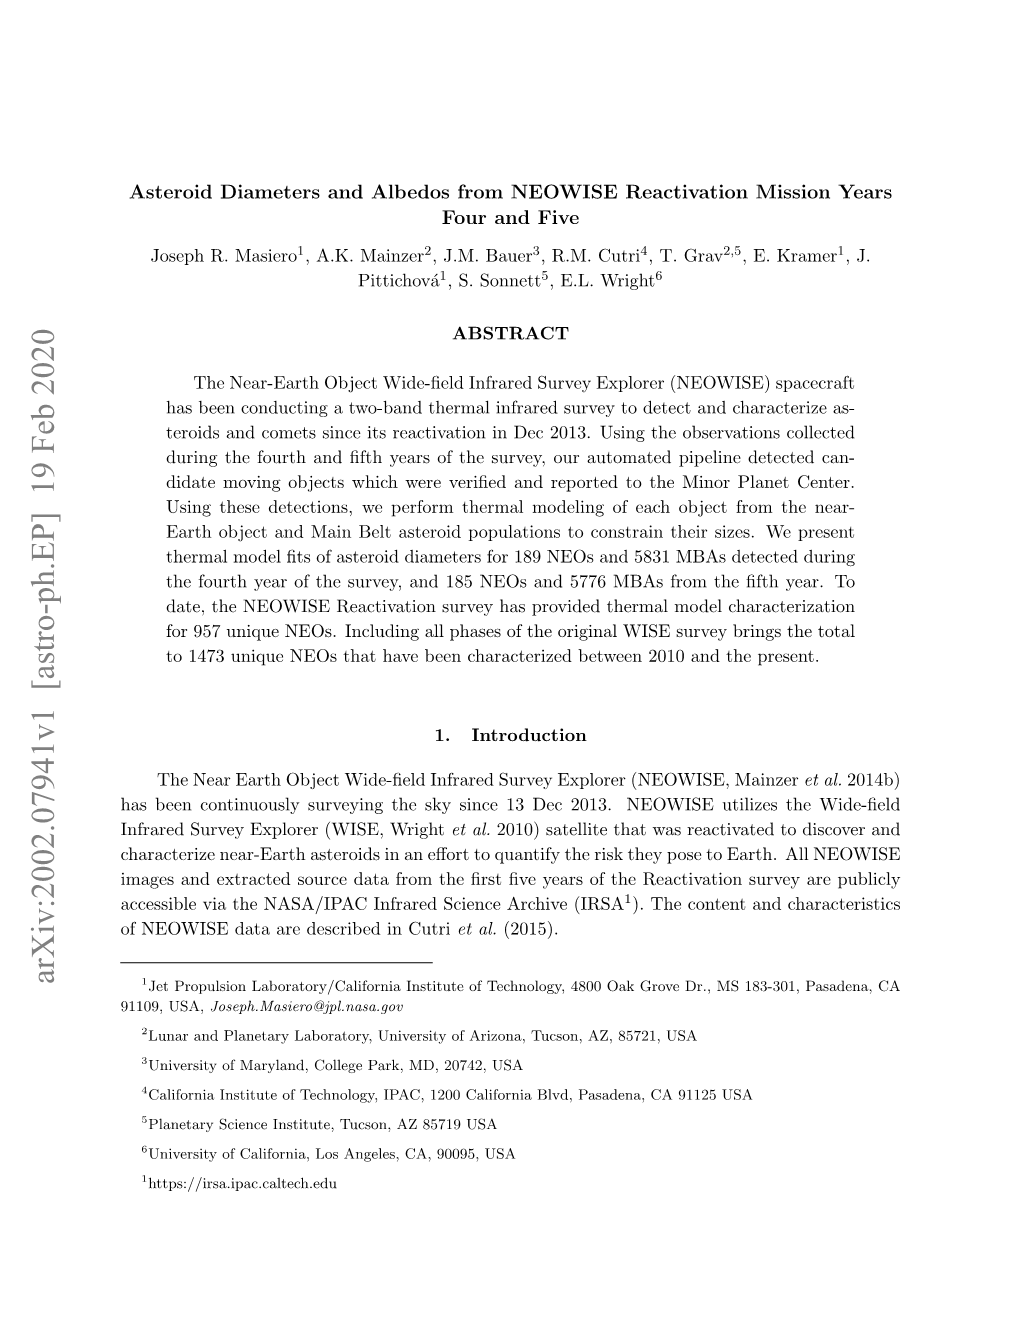 Asteroid Diameters and Albedos from NEOWISE Reactivation Mission Years Four and Five